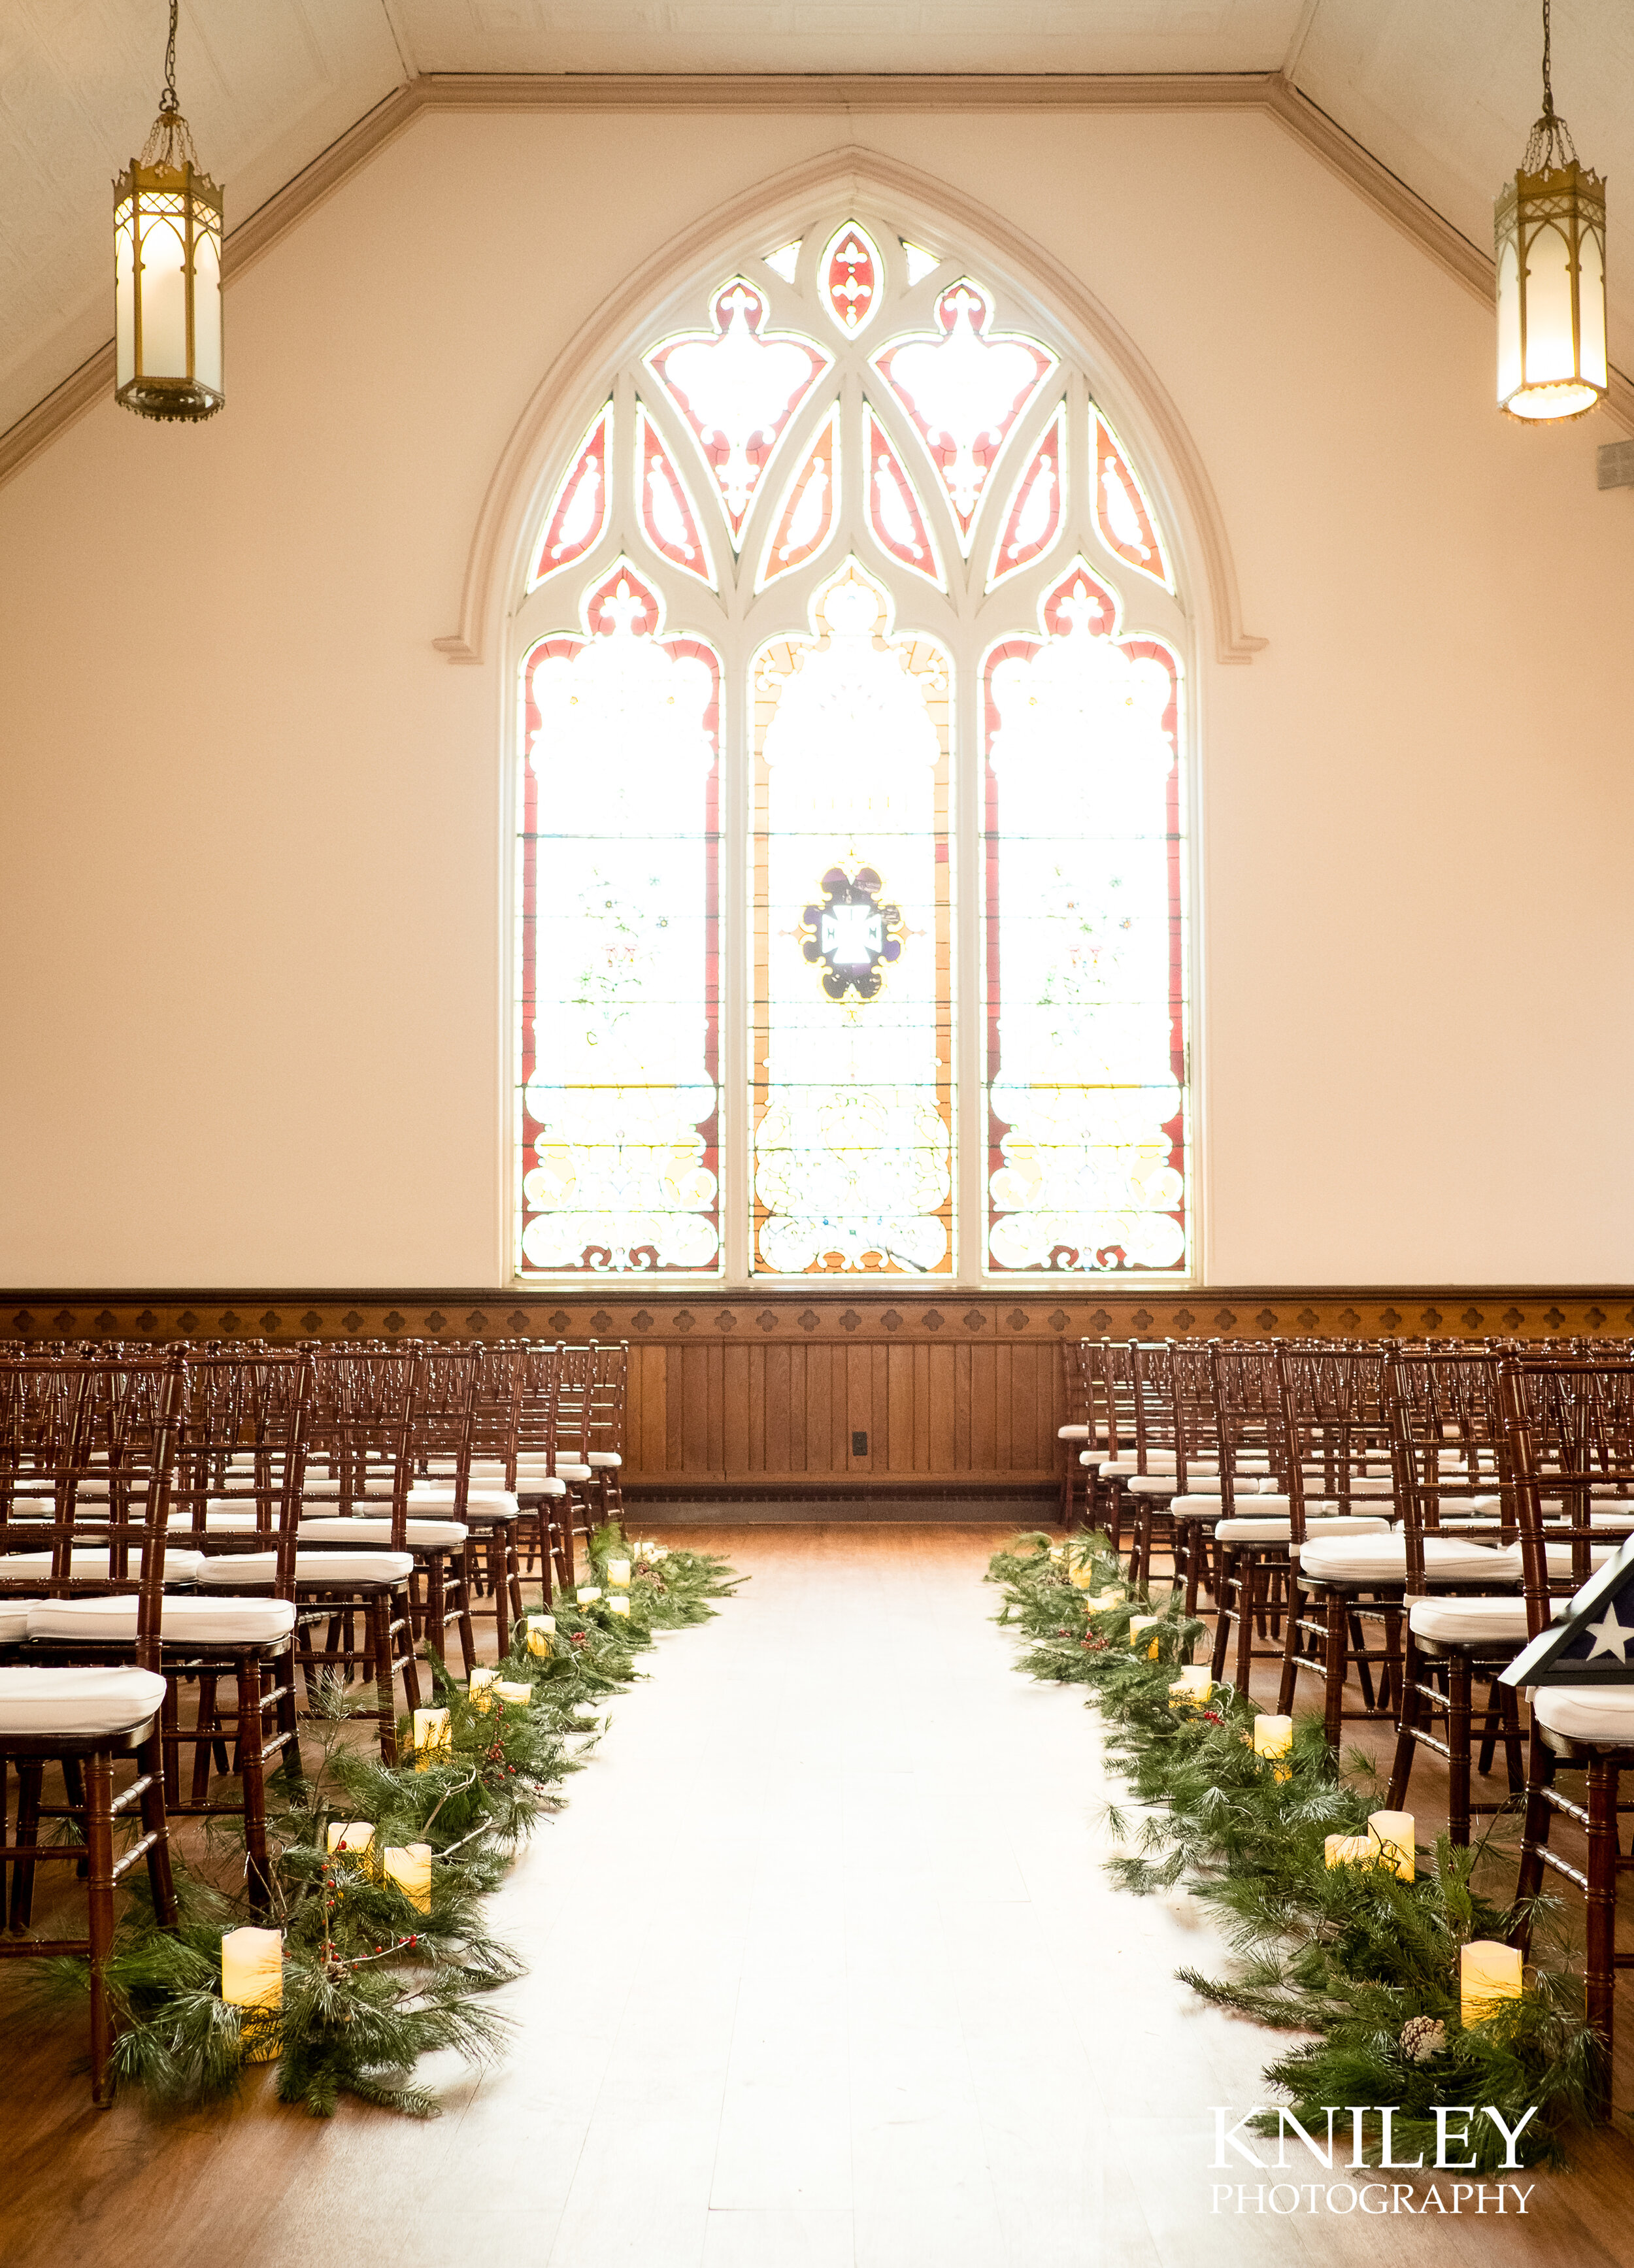 003-Kniley-Photography-Westminster-Chapel-Wedding-Venue-Picture-7642.jpg